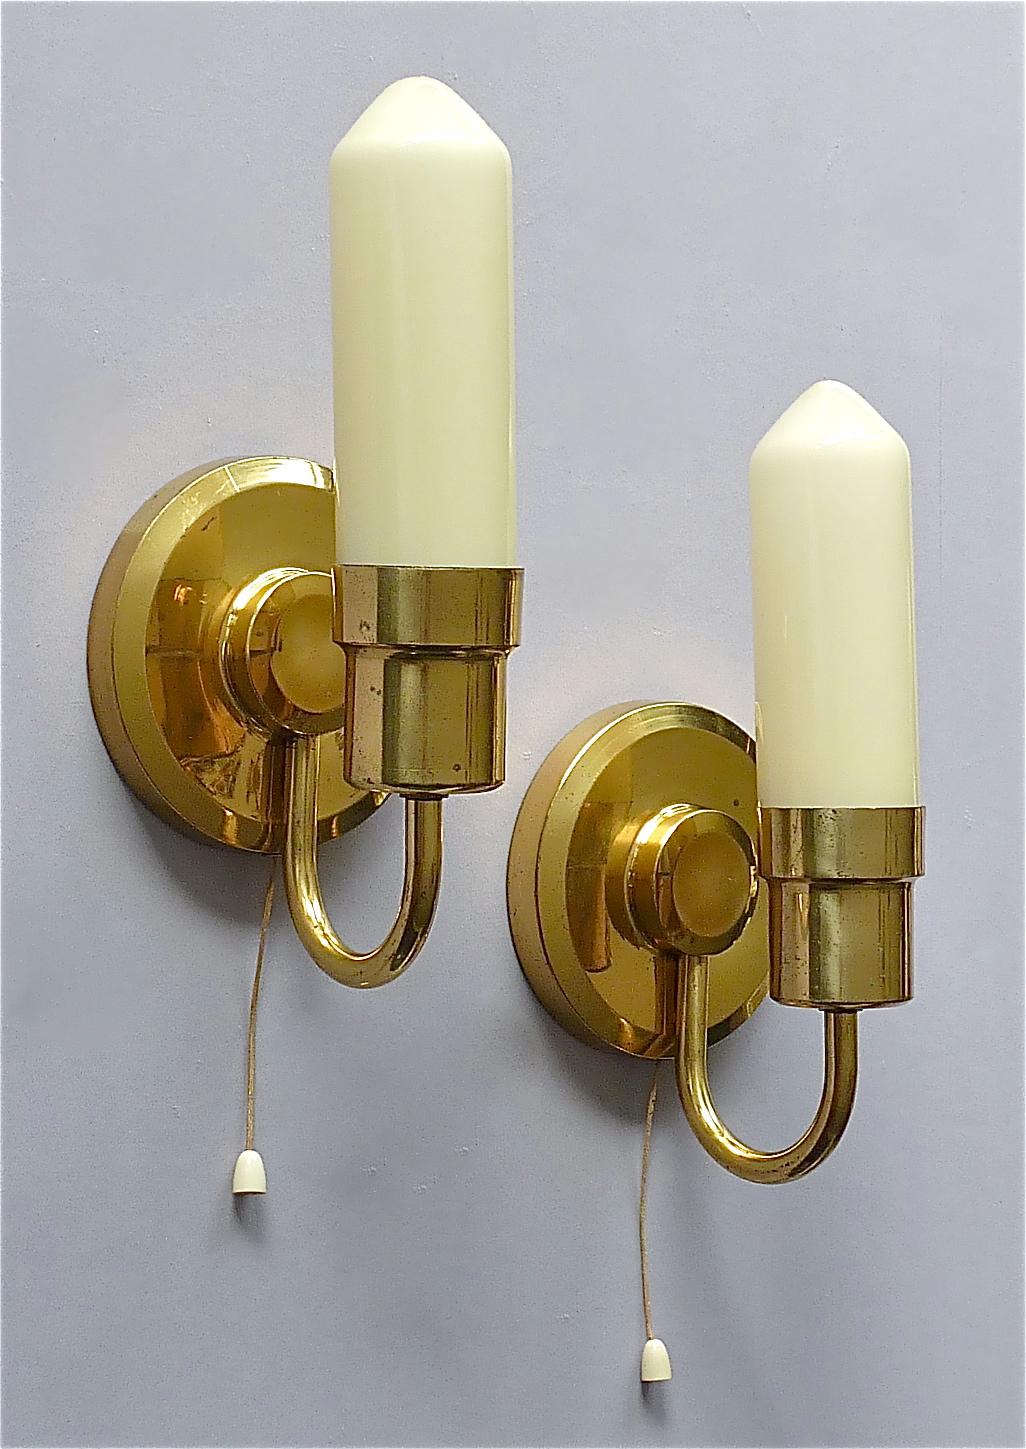 Cool and rare Austrian or Scandinavian Mid-Century Modern sconces in Paavo Tynell Taito Oy Style, circa 1950s. The wall lights which are made of patinated brass with faint yellow opaline candle glass tubes and threat-switches are 24 cm / 9.45 inches